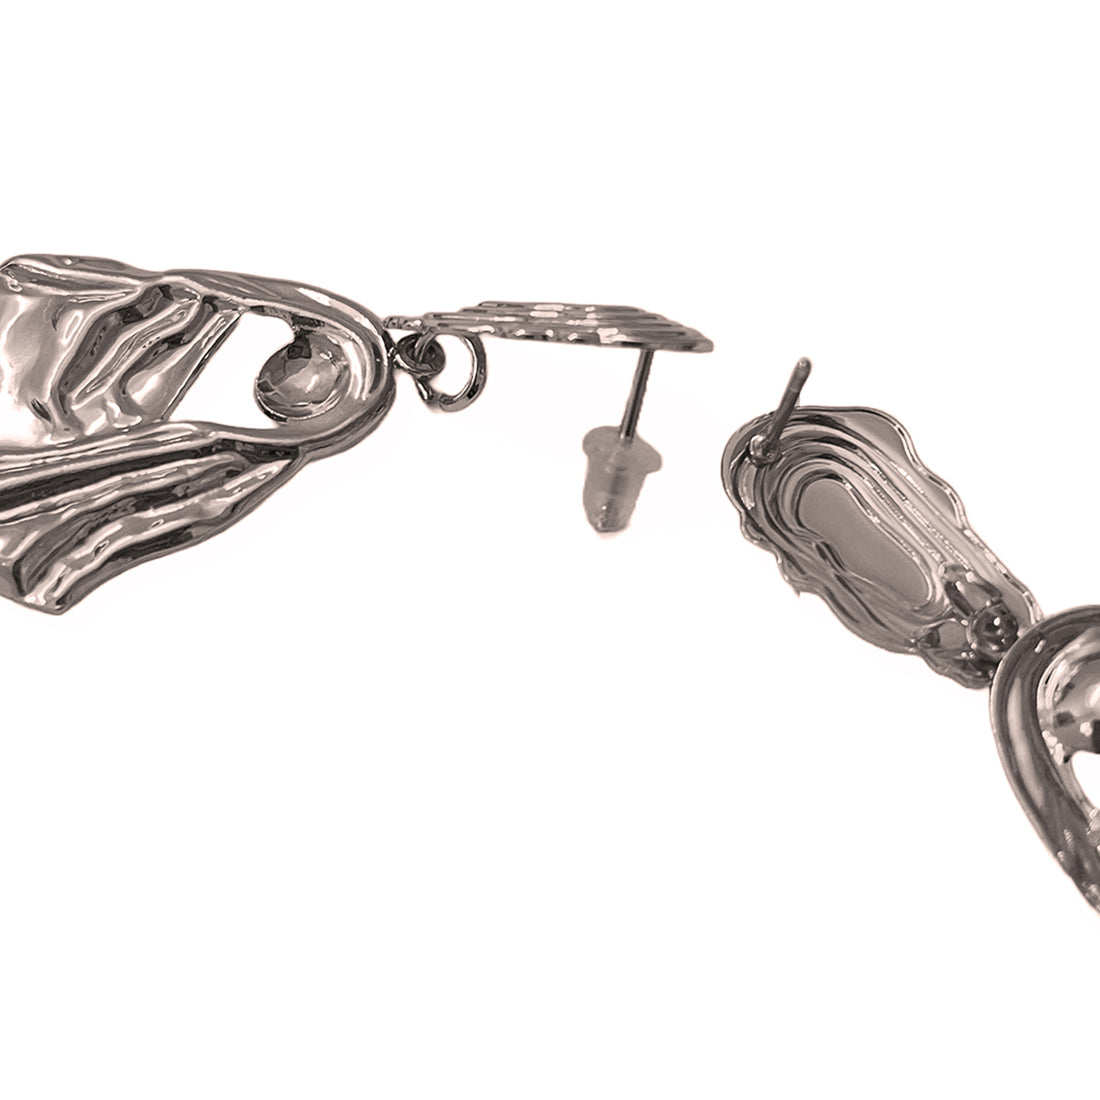 Oversized Hammered Silver-Toned Leaf Drop Earrings